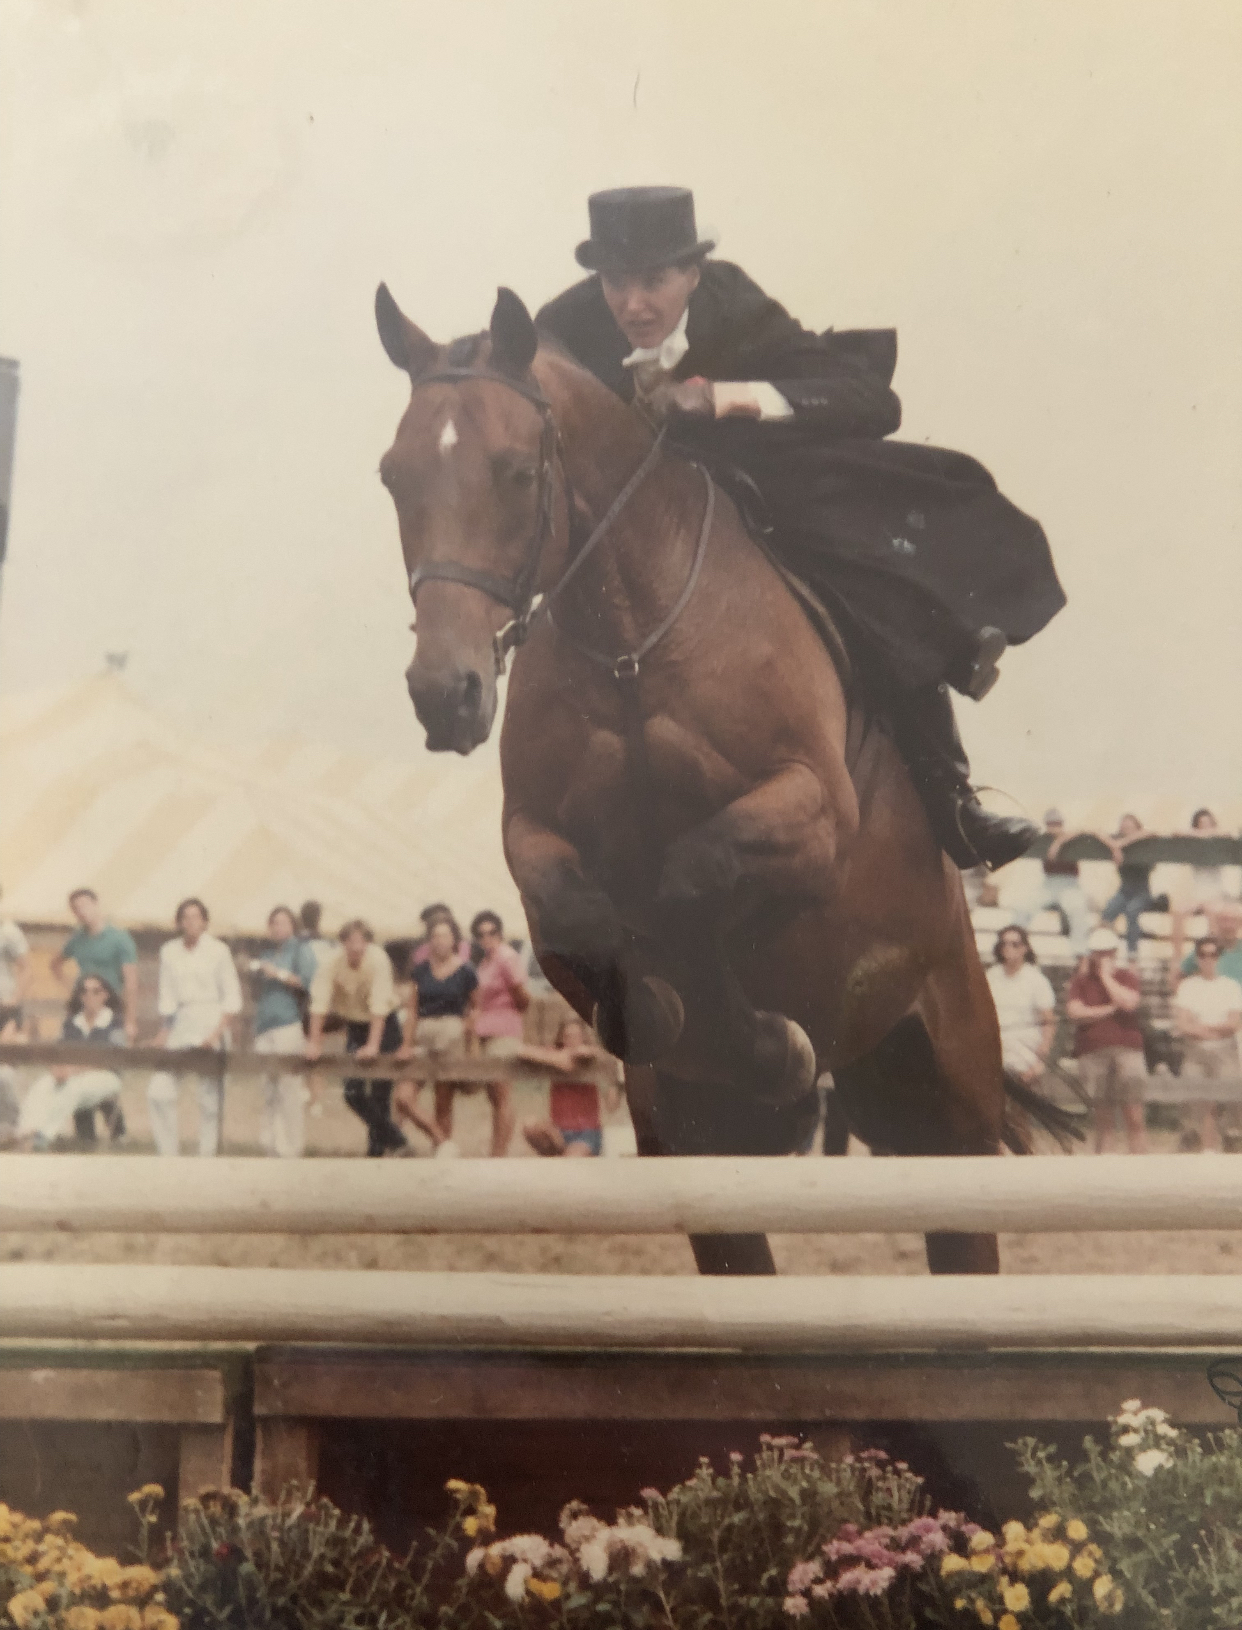 Patsy Topping was an accomplished equestrian and had a particular affinity for competing in the sidesaddle division. She was champion in that division at many shows, including the Hampton Classic, which hosted the sidesaddle class until the 1990s.  COURTESY THE TOPPING FAMILY